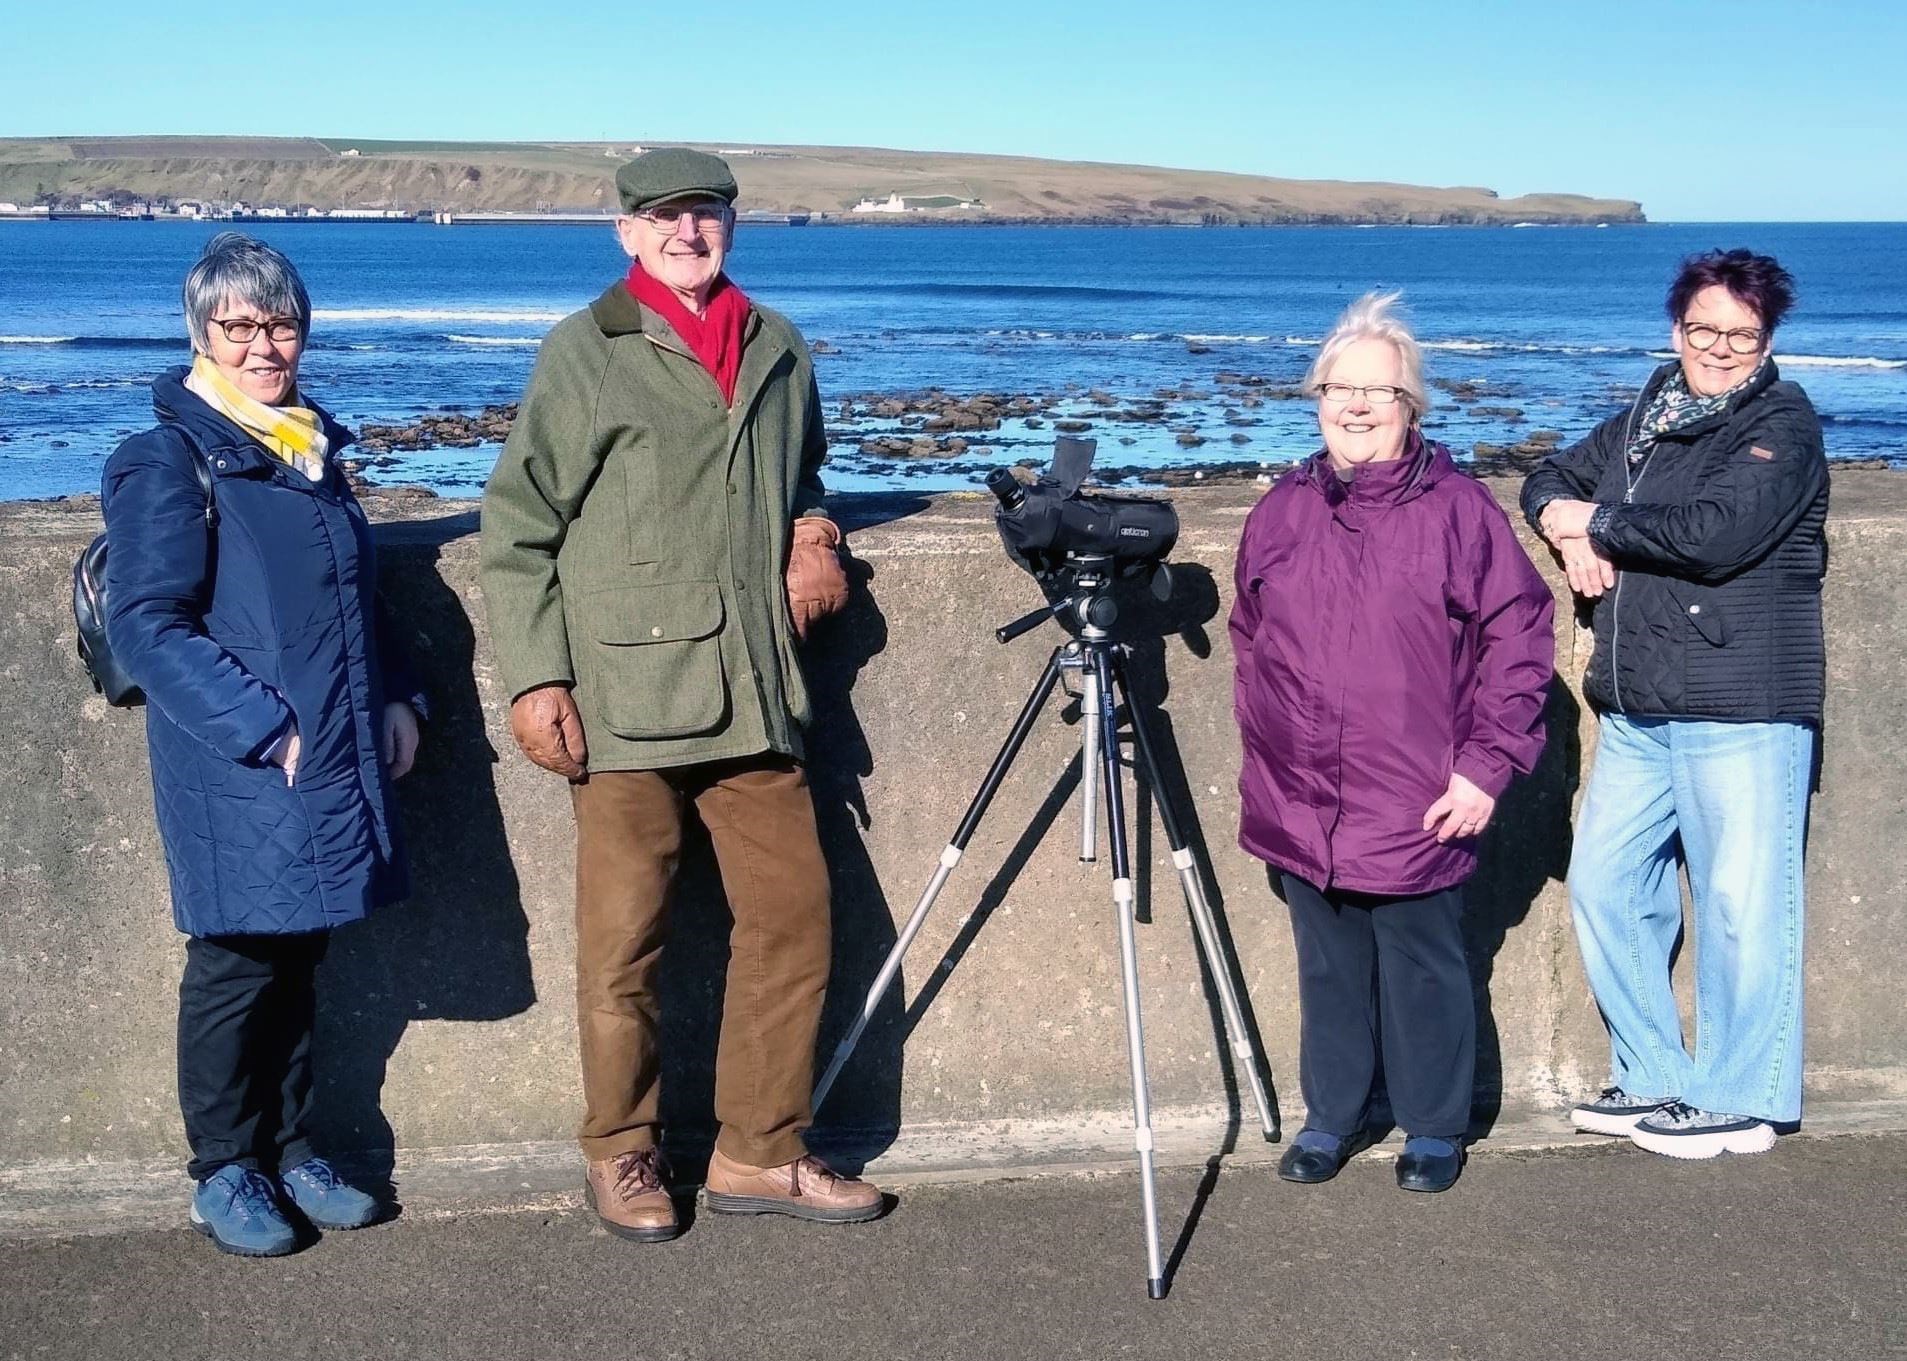 A previous wak in Thurso with Margaret, Cyril, Teenie and Nancy.